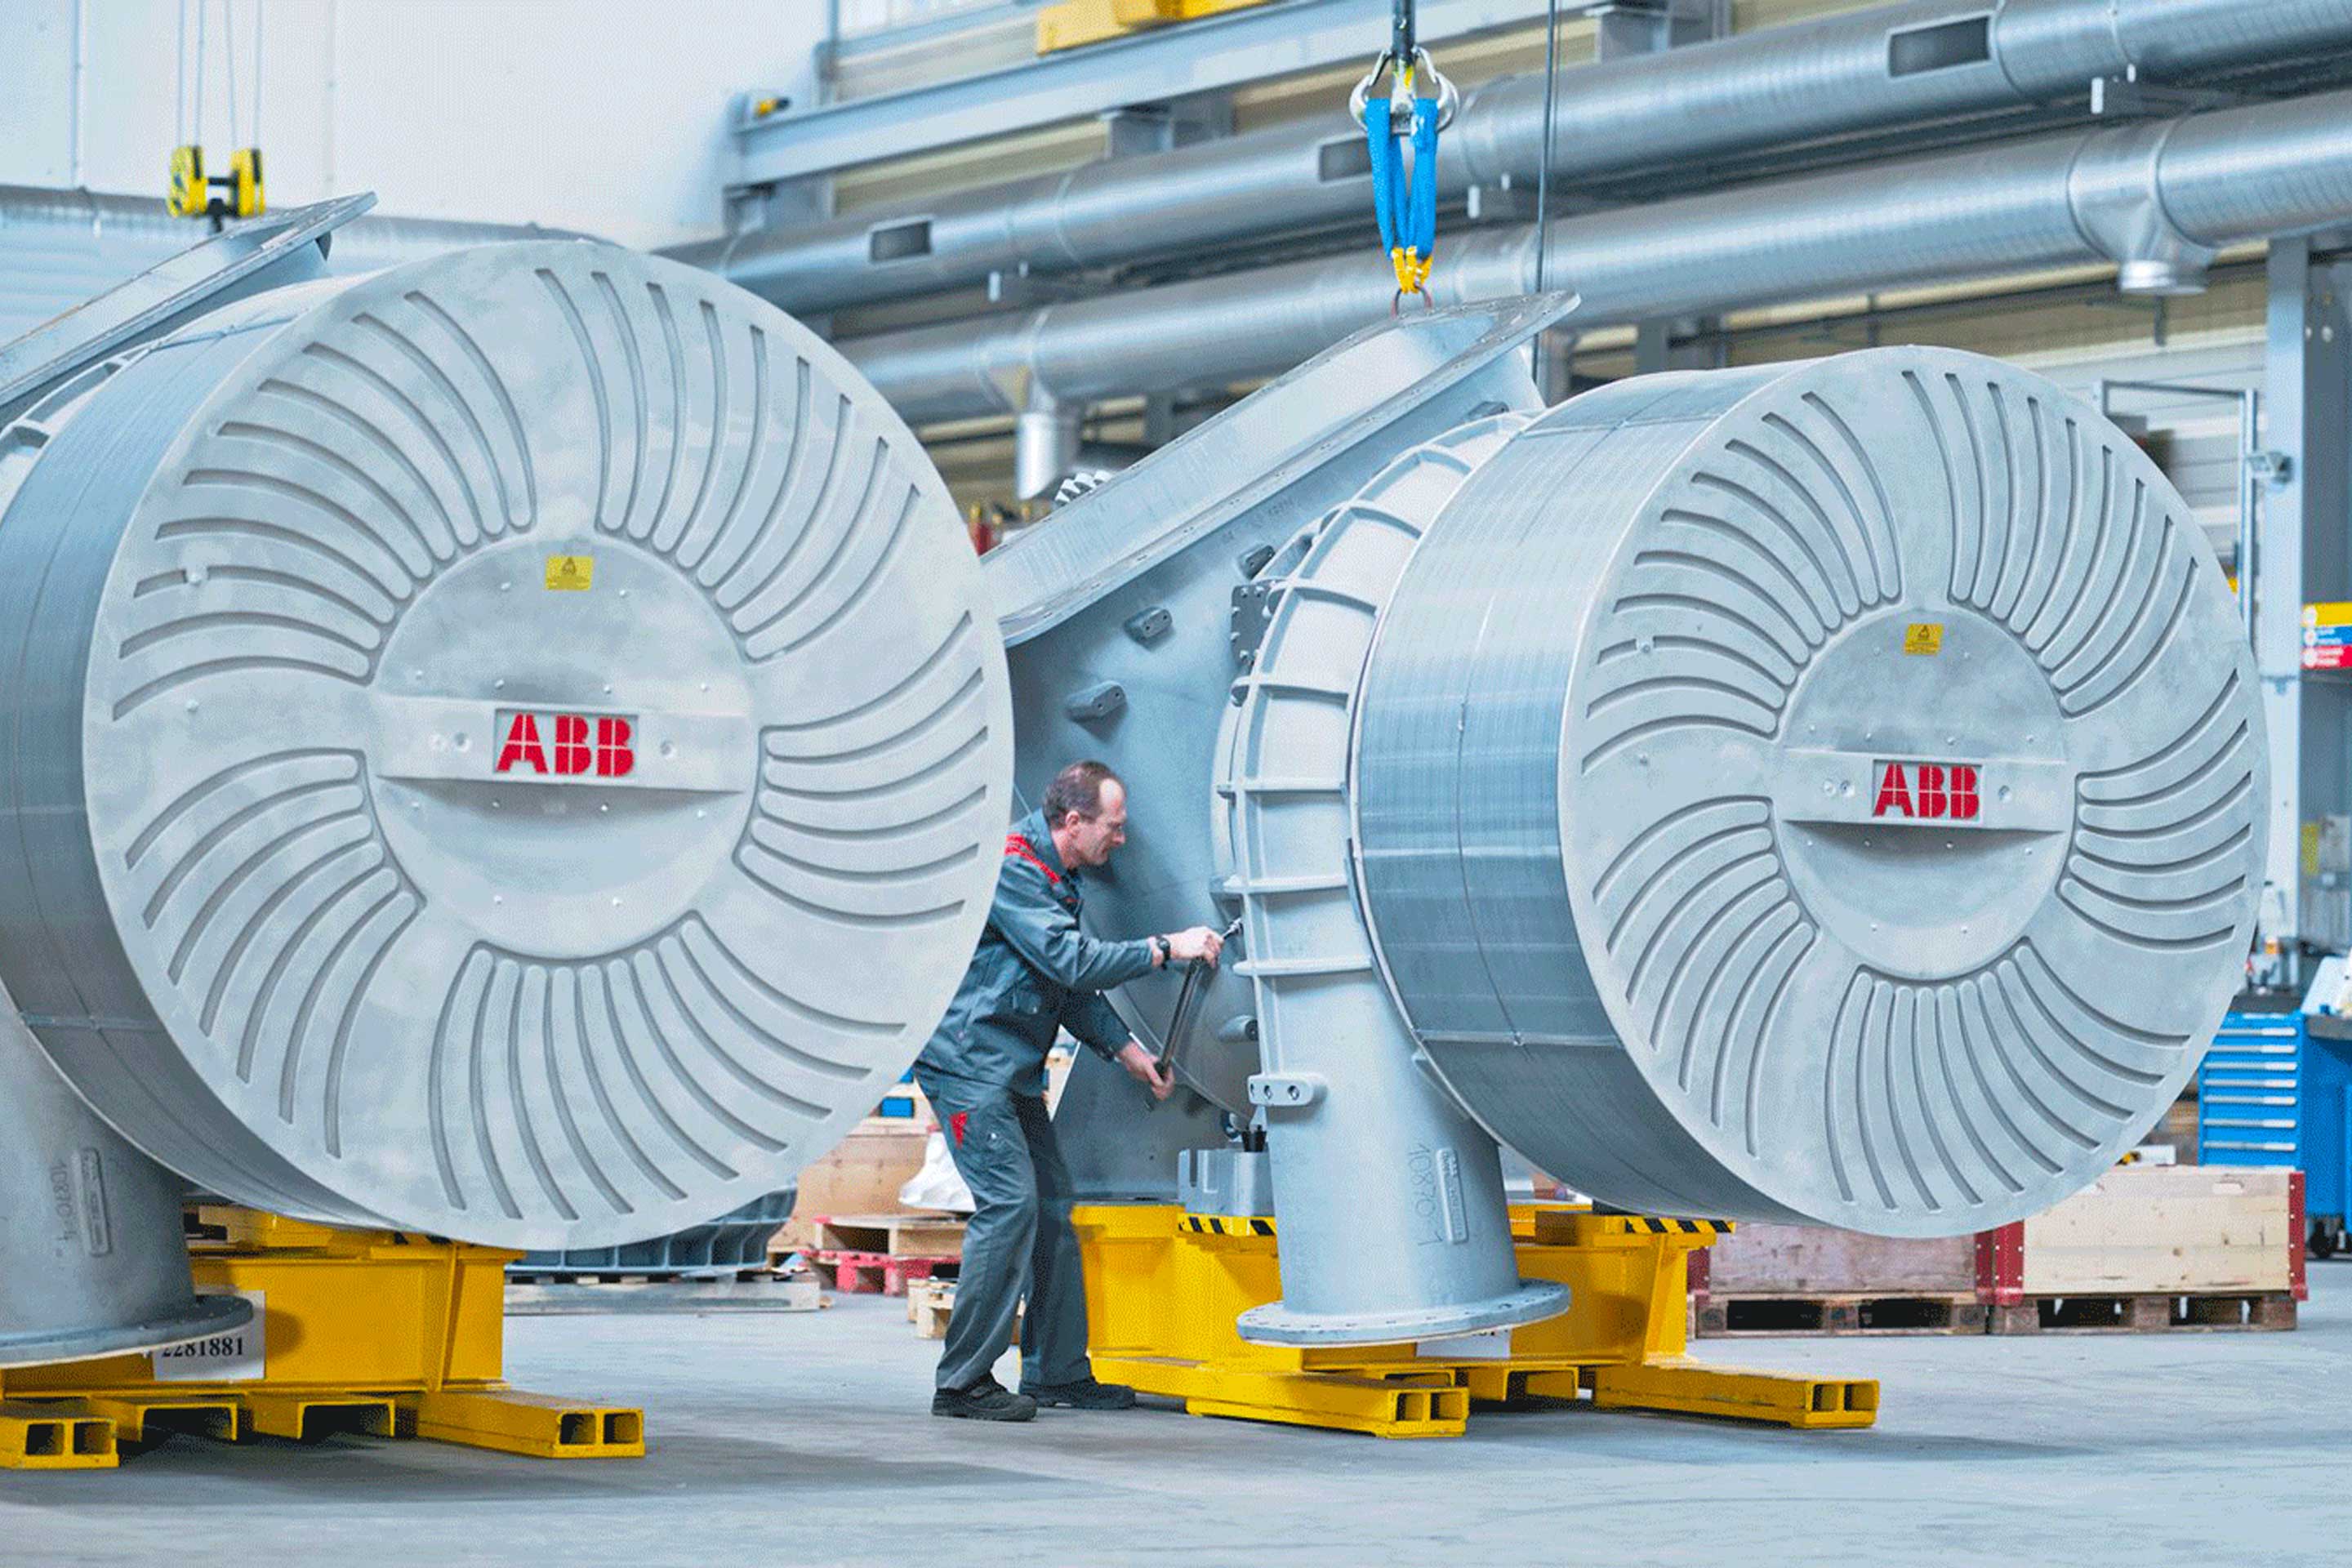 An ABB Turbocharging service station like the one in Nigeria